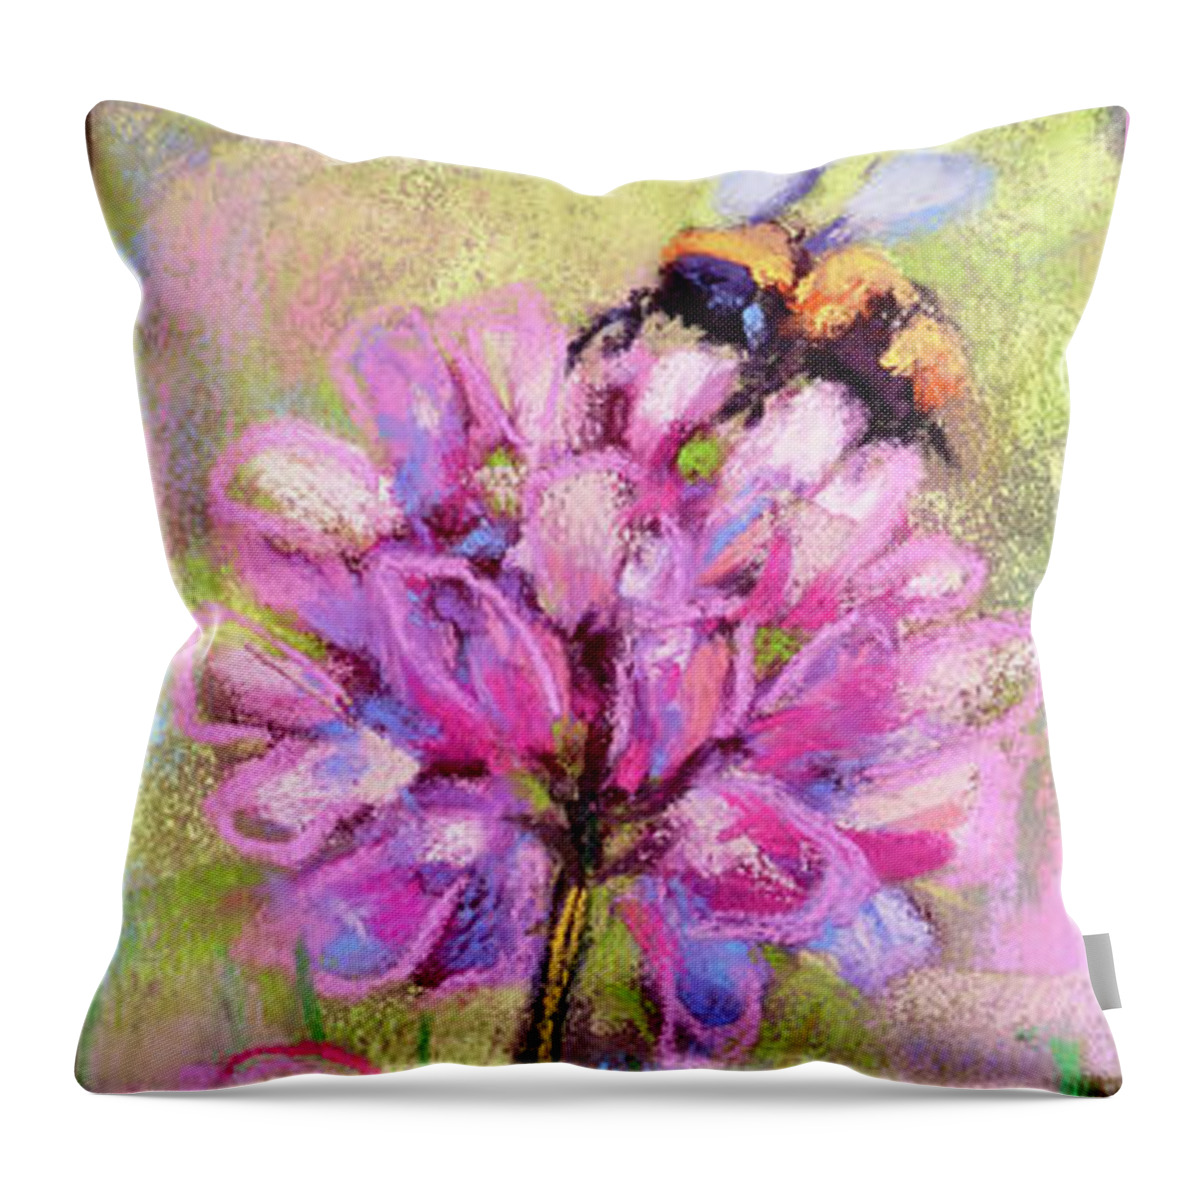 Bees Throw Pillow featuring the painting Flower Hugger by Susan Jenkins